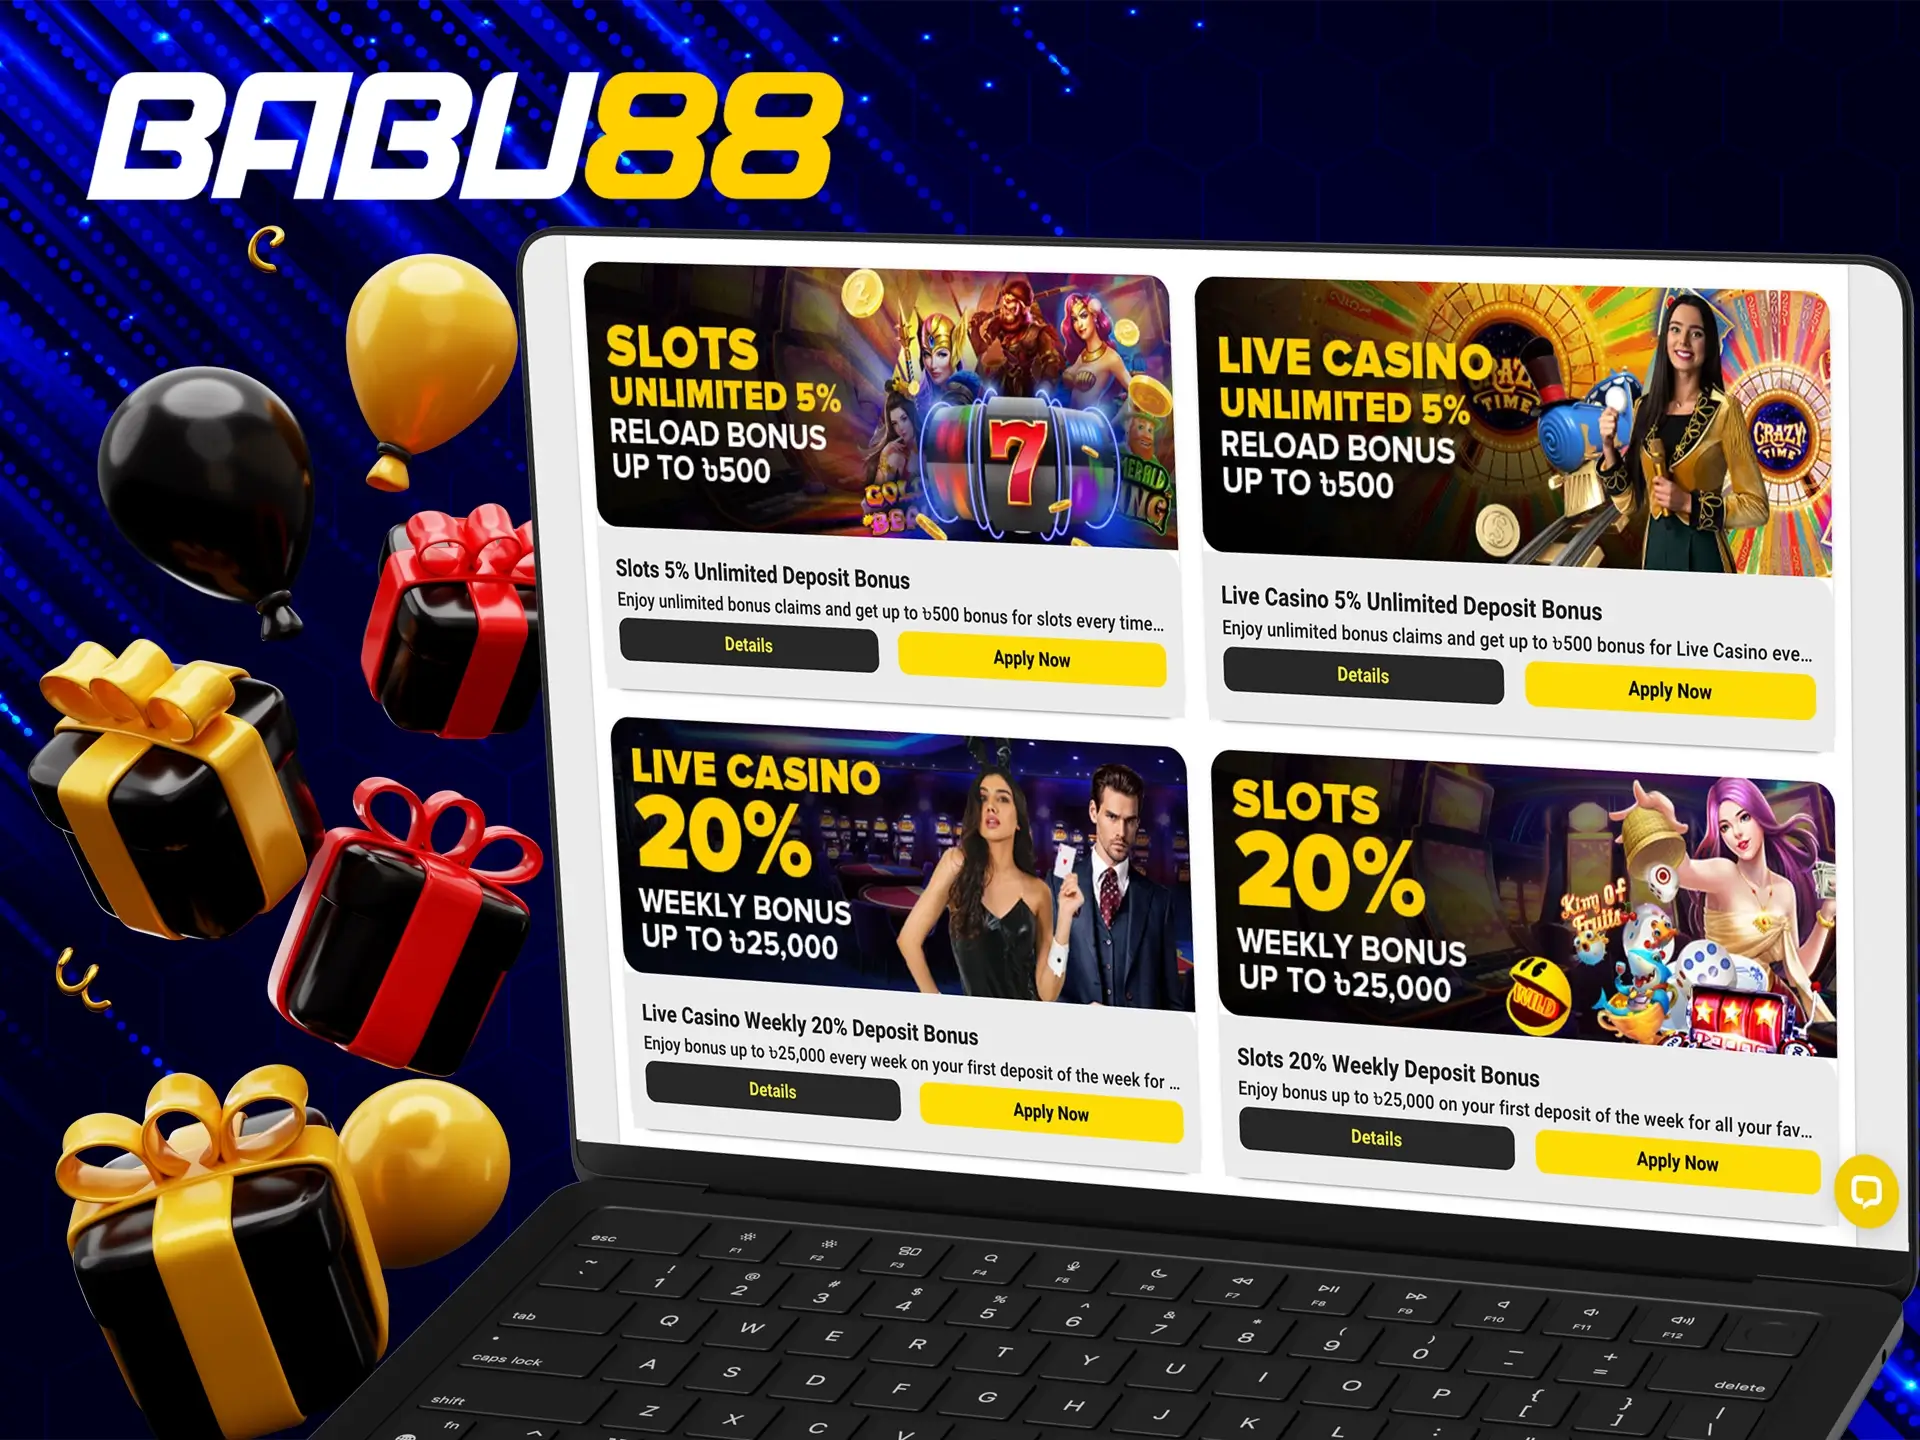 A wide variety of promotions and bonuses give users the opportunity to play and gain experience.